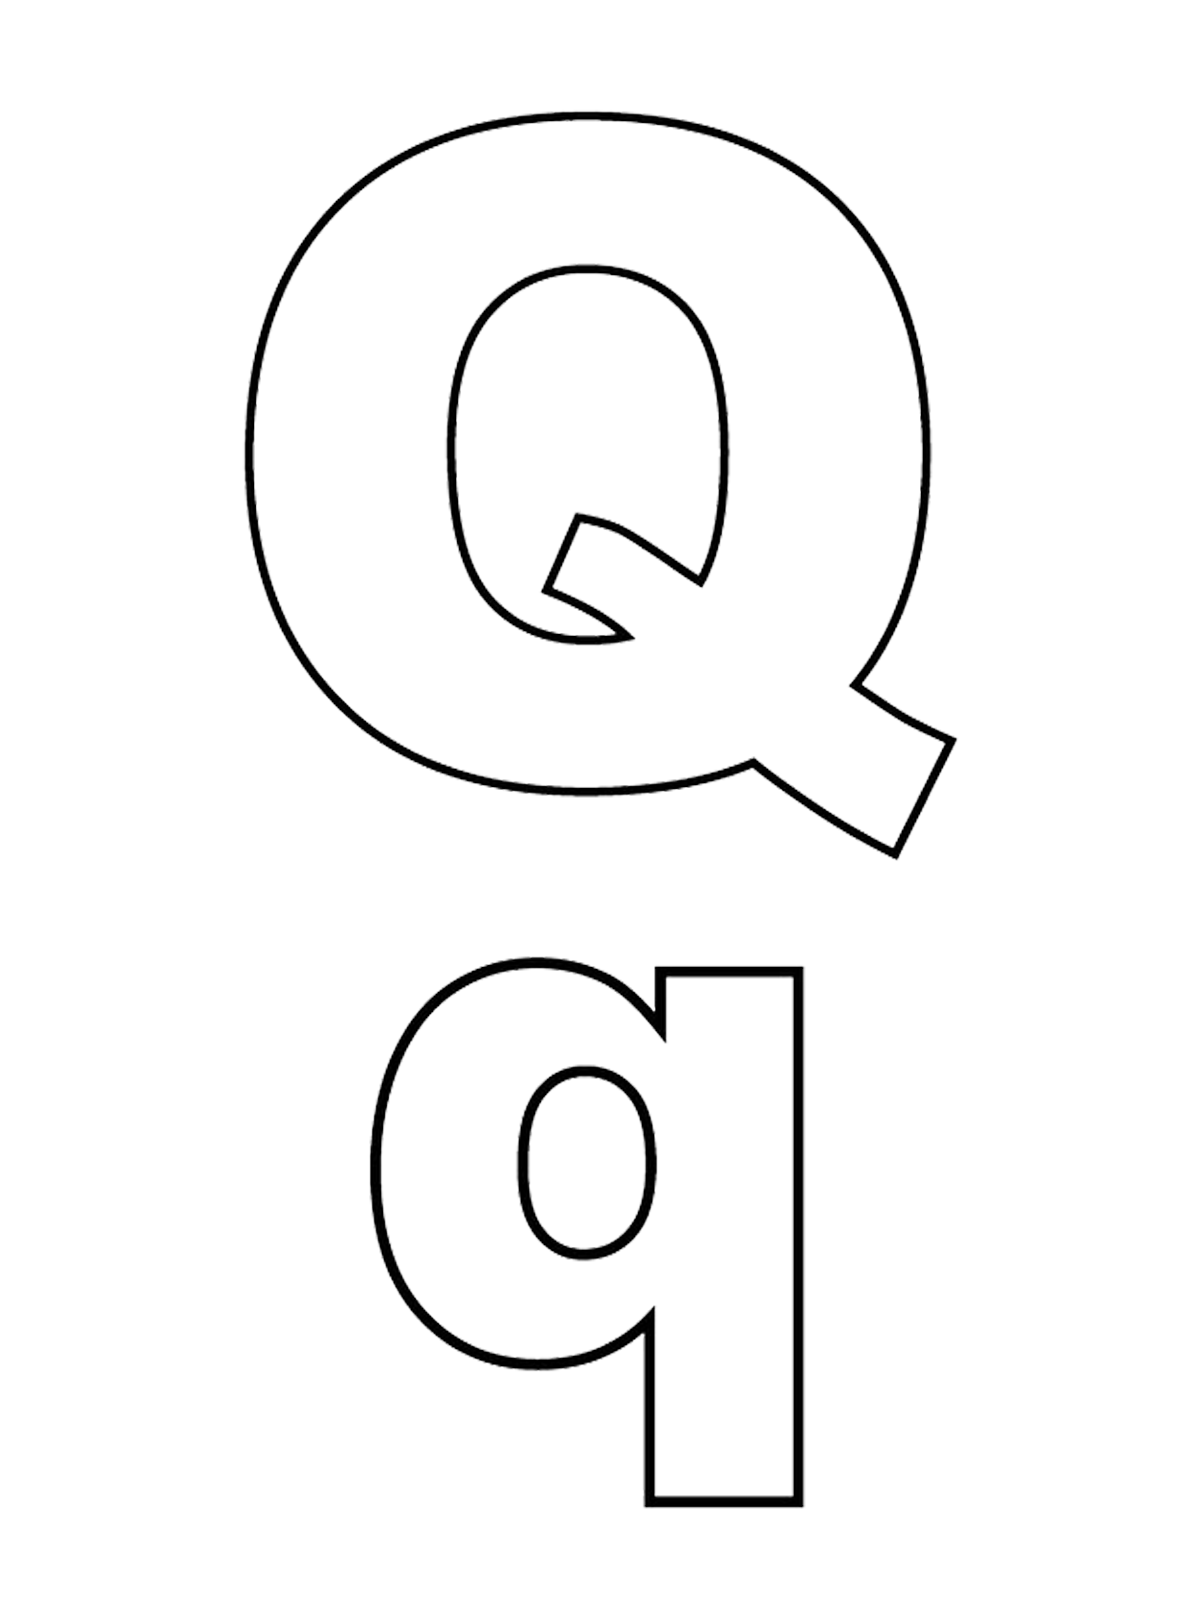 Letters and numbers - Letter Q capital letters and lowercase